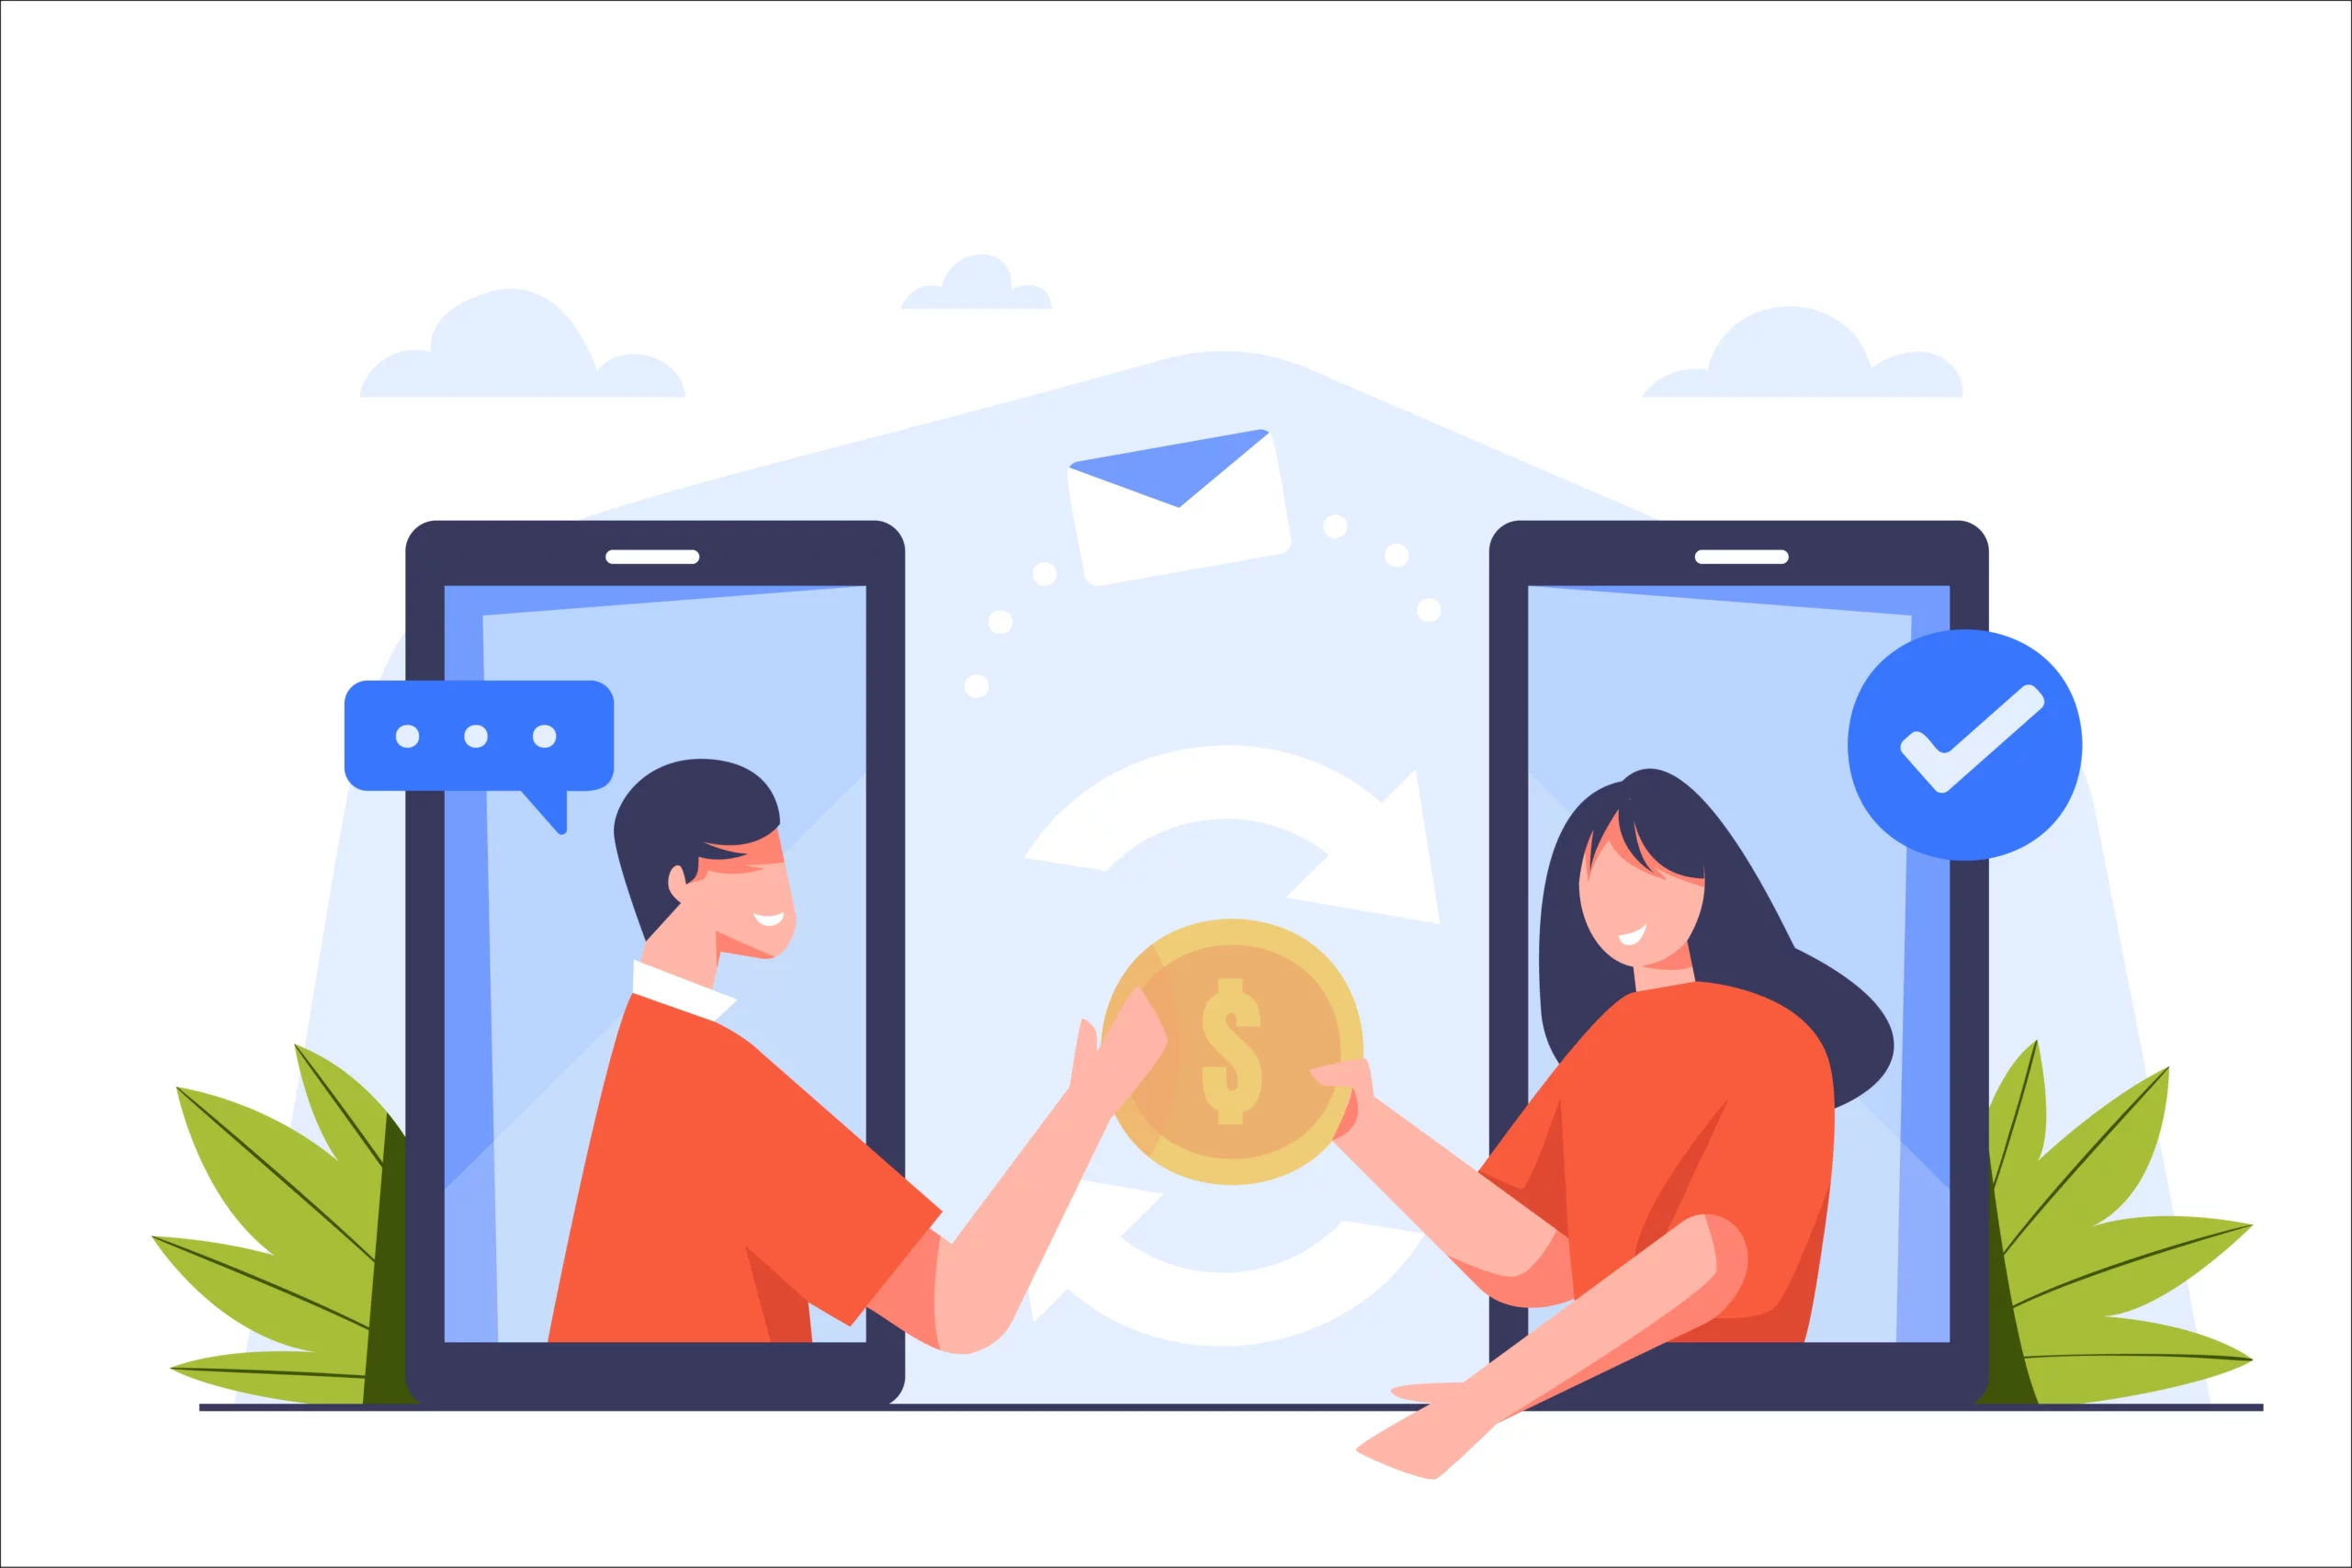 Illustration of a man and a woman conducting a mobile payment transaction, both appearing on smartphone screens with symbols of messaging and Penny Drop Verification.